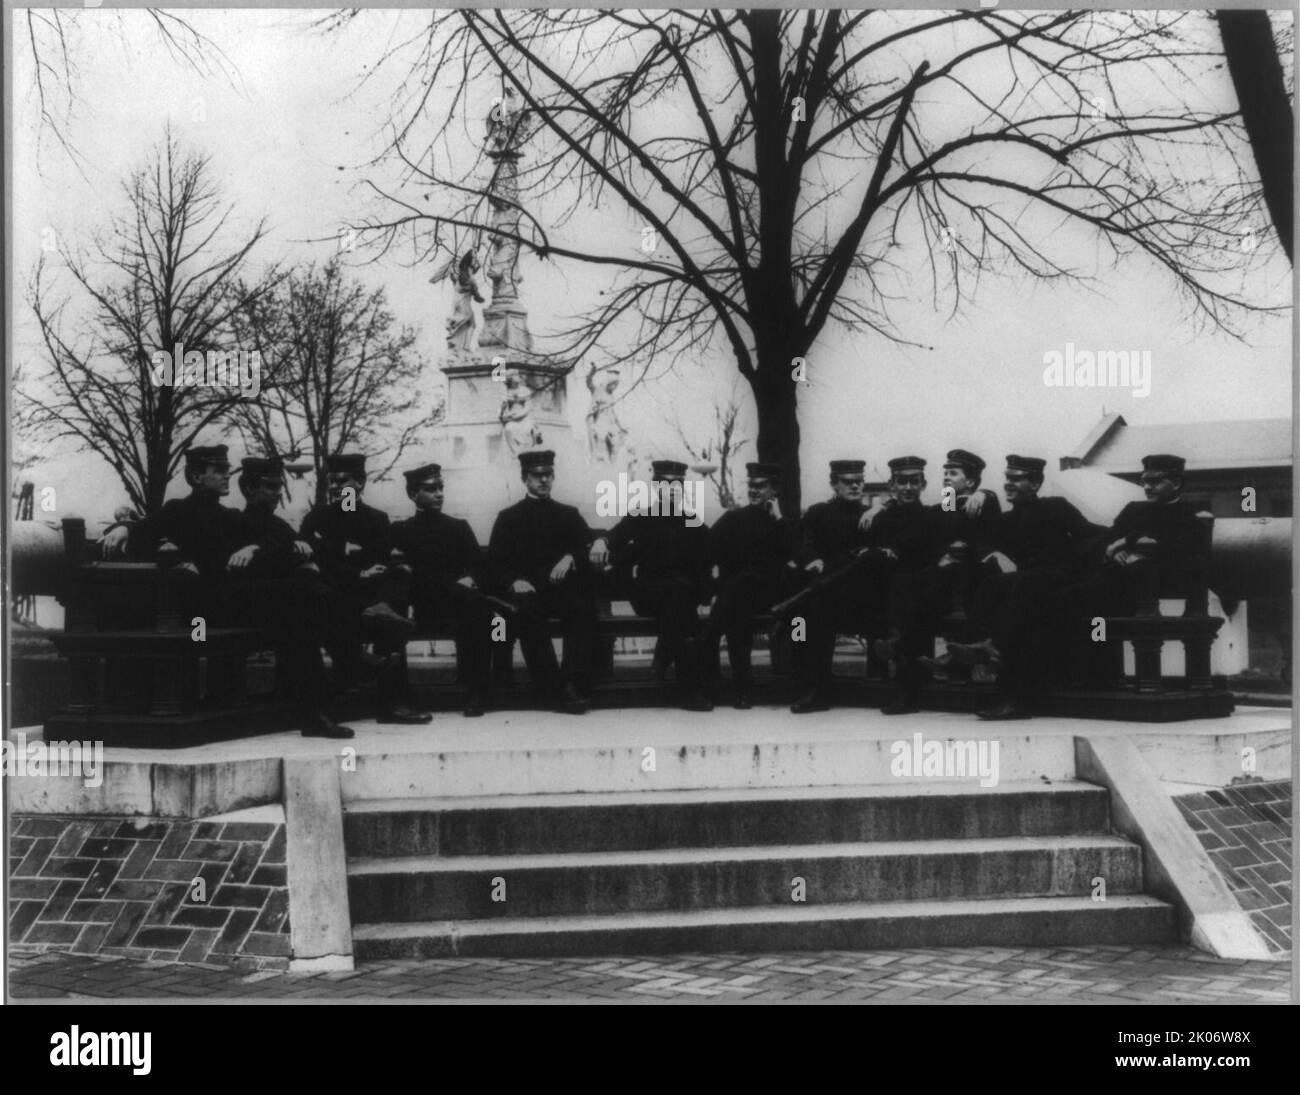 U.S. Naval Academy, Annapolis, 1901. Midshipmen, class of 1902, incl. James O. Richardson, sit on Second Class Bench in semi-circle in front of Tripoli Monument. [James Otto Richardson served as an admiral in the United States Navy from 1902 to 1947]. Stock Photo